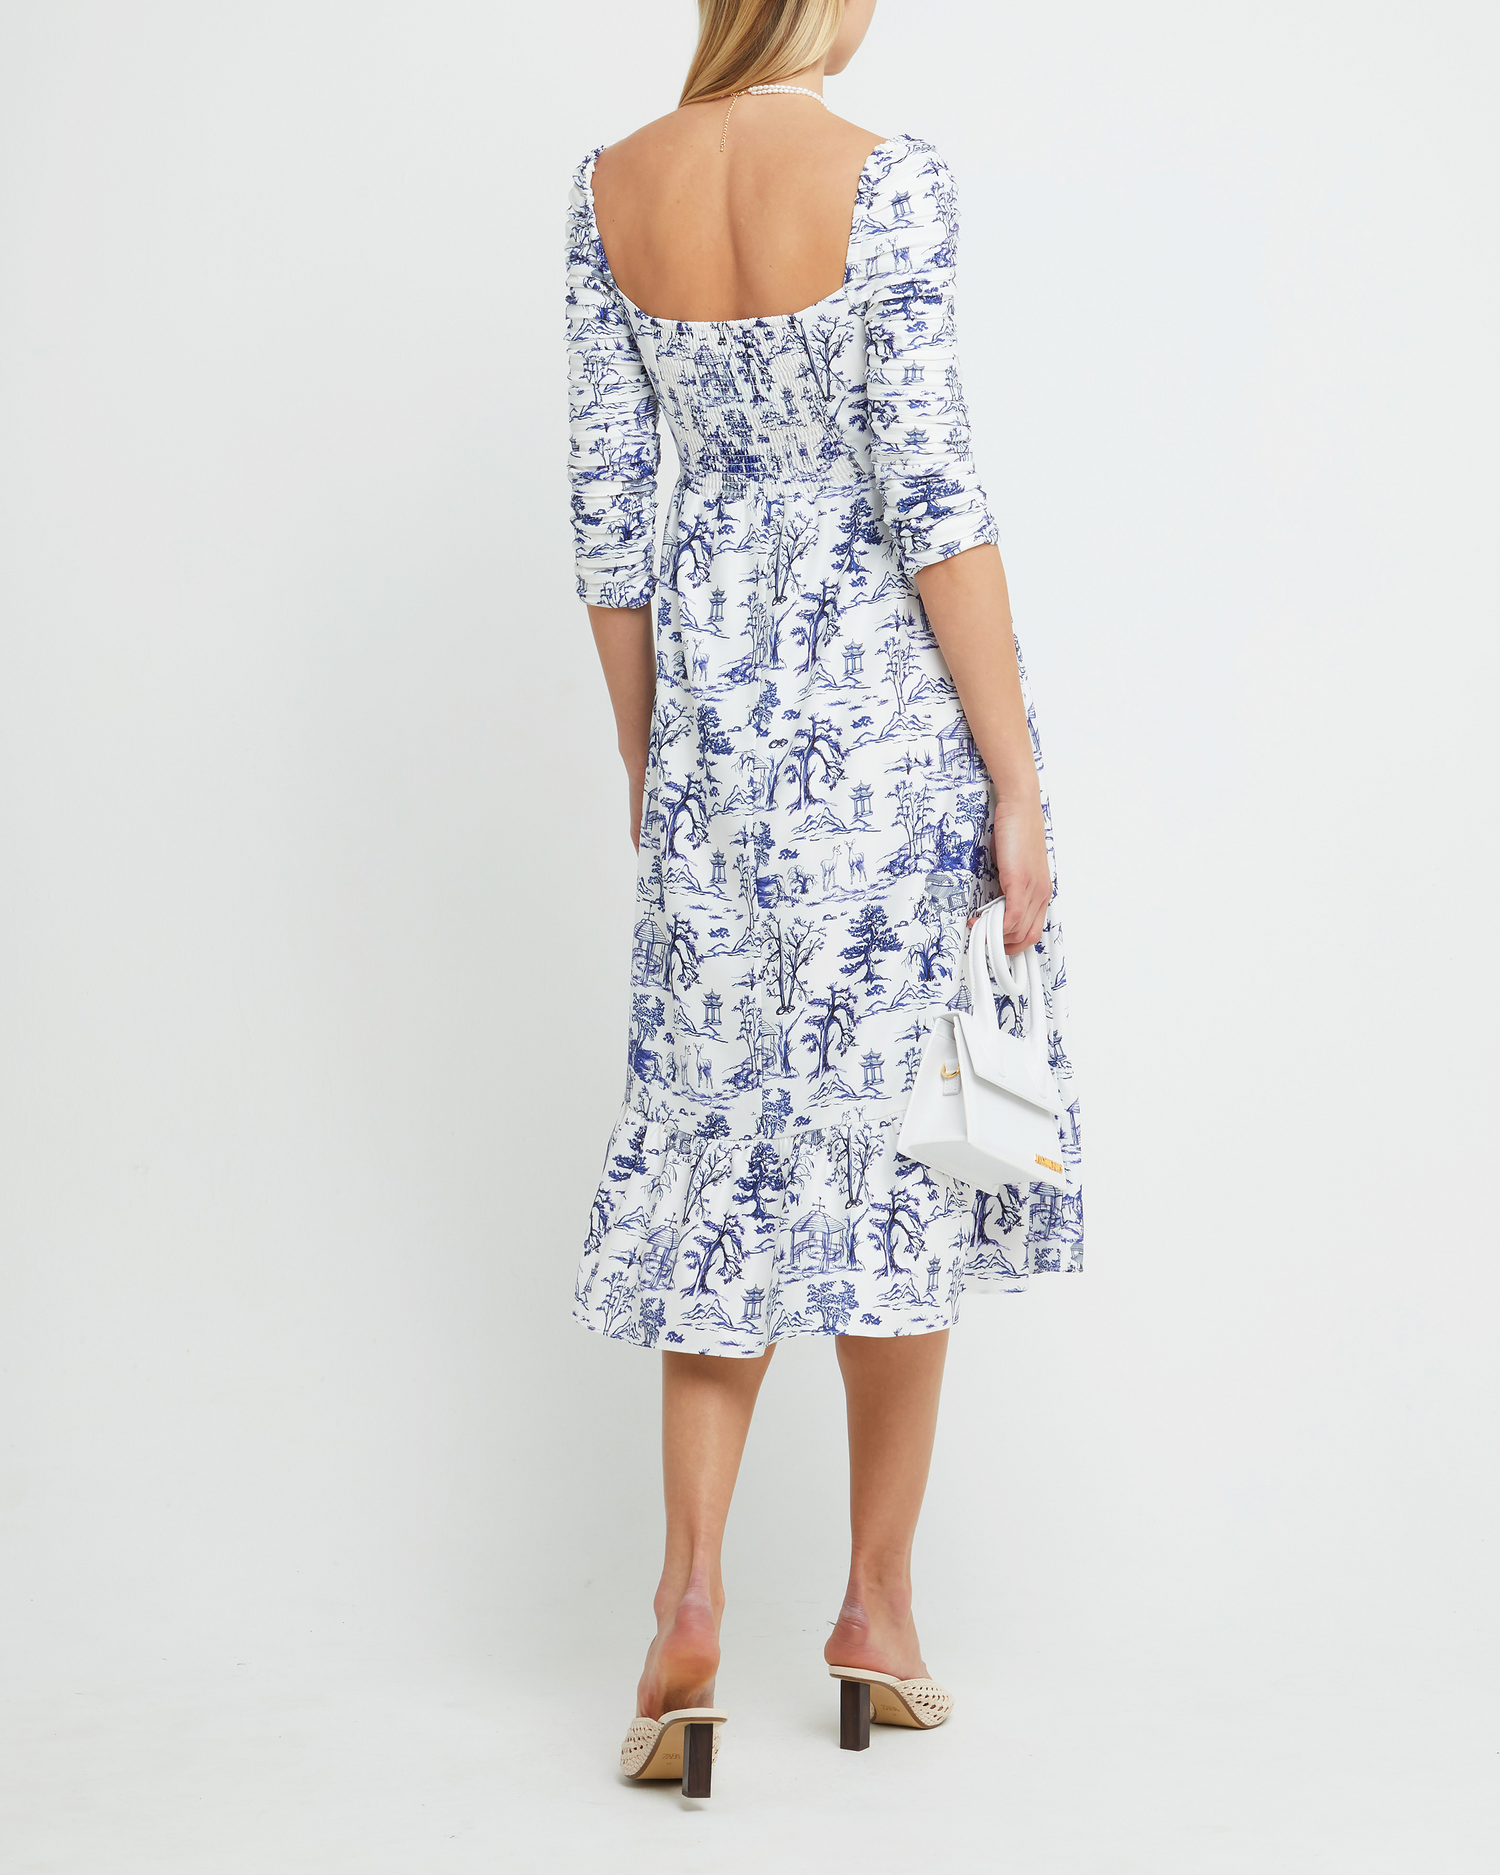 Fifth image of Bonnie Dress, a blue midi dress, toile, pockets, ruched sleeves, square neckline, long sleeves, 3/4 sleeves